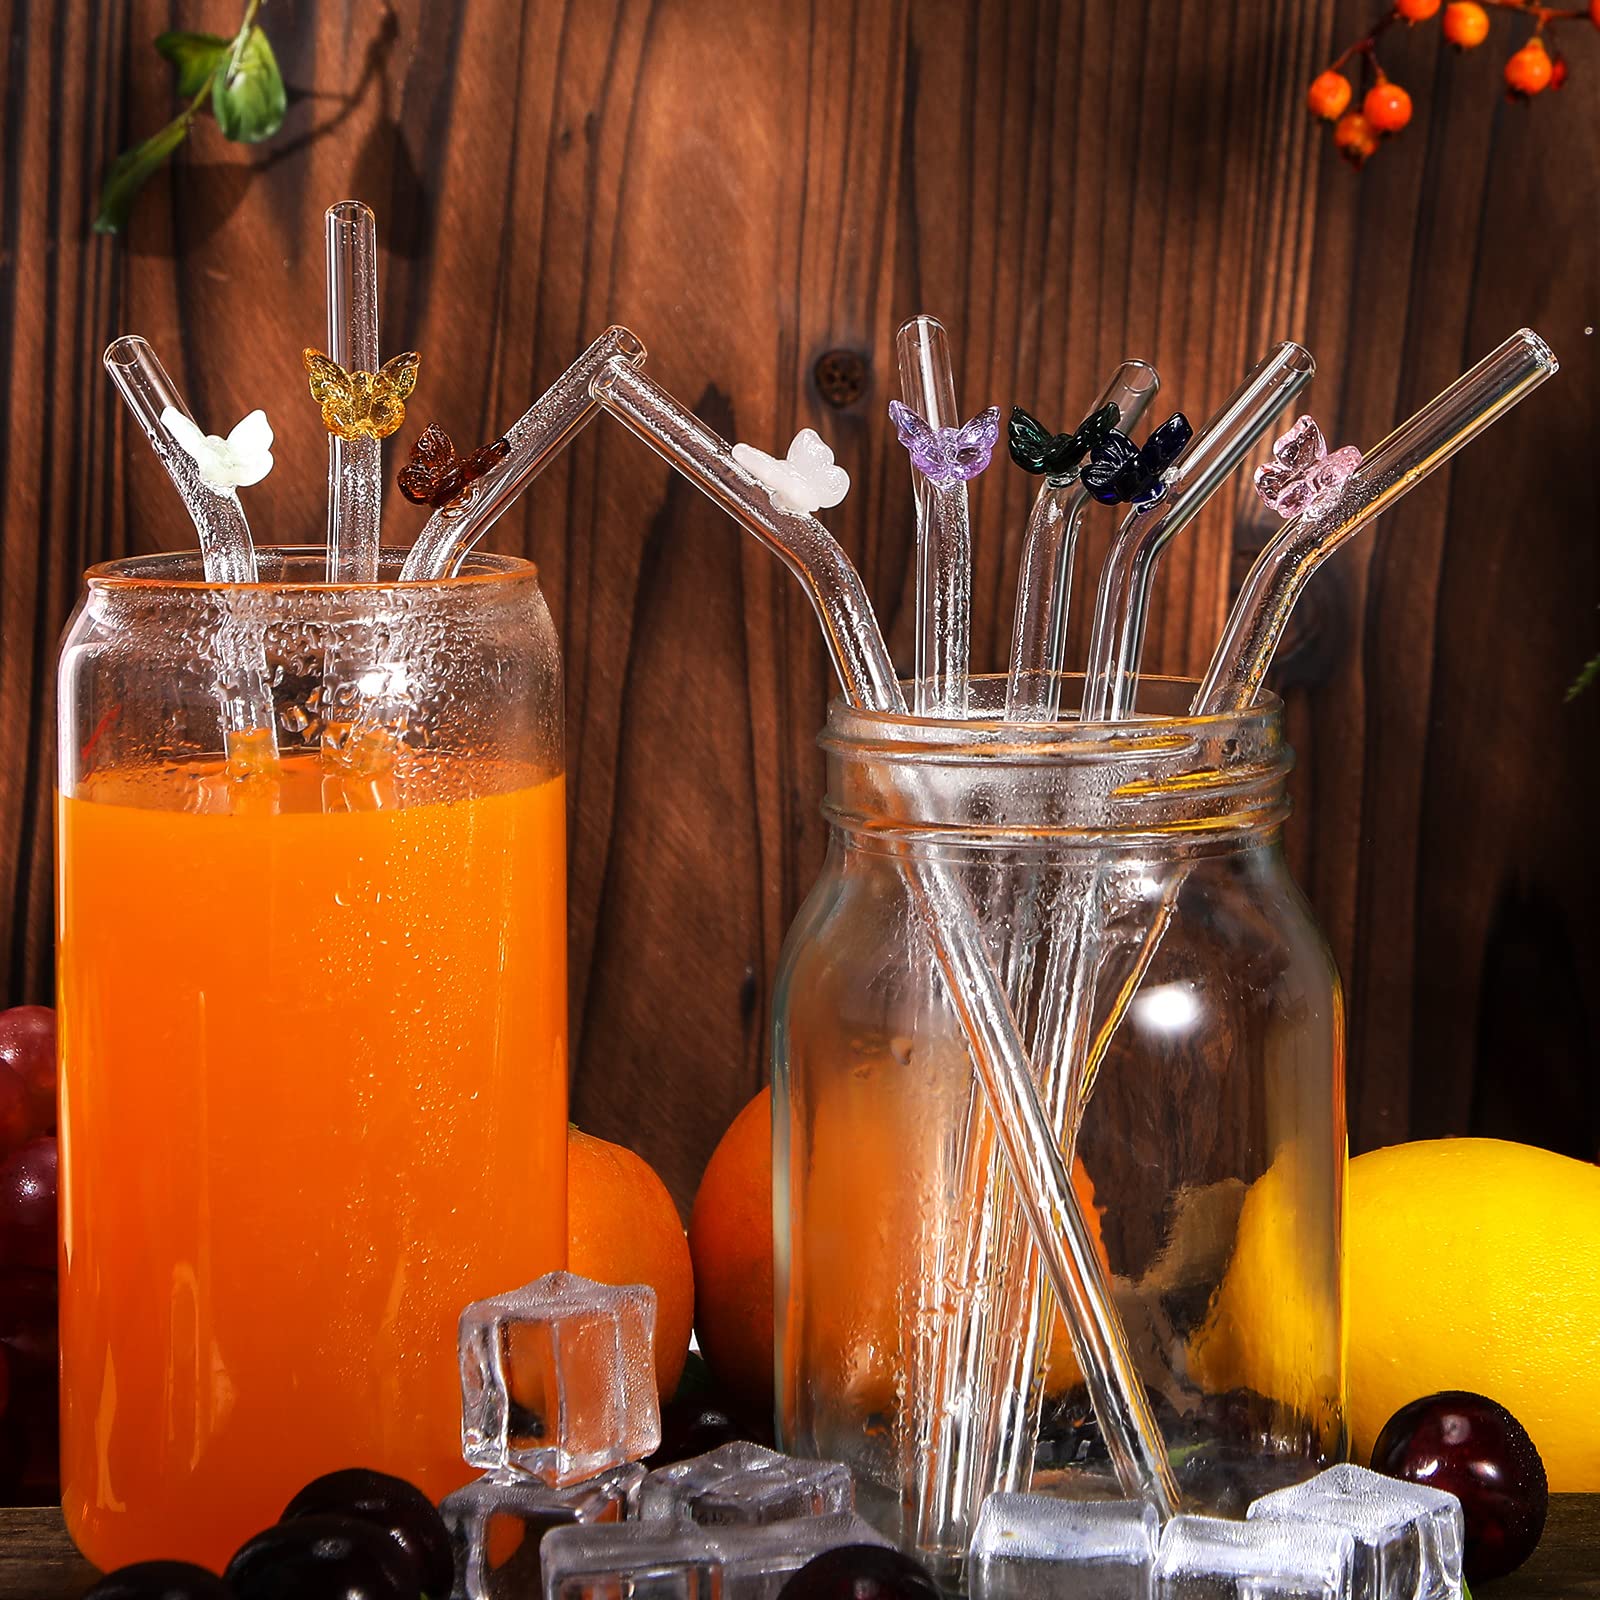 8 Pcs Glass Straws with Butterflies 8 mm x 7.9 Reusable Glass Straws Colorful Glass Butterfly Straws Shatter Resistant Bent Drinking Straws with 2 Cleaning Brushes for Smoothie Juice Beverages